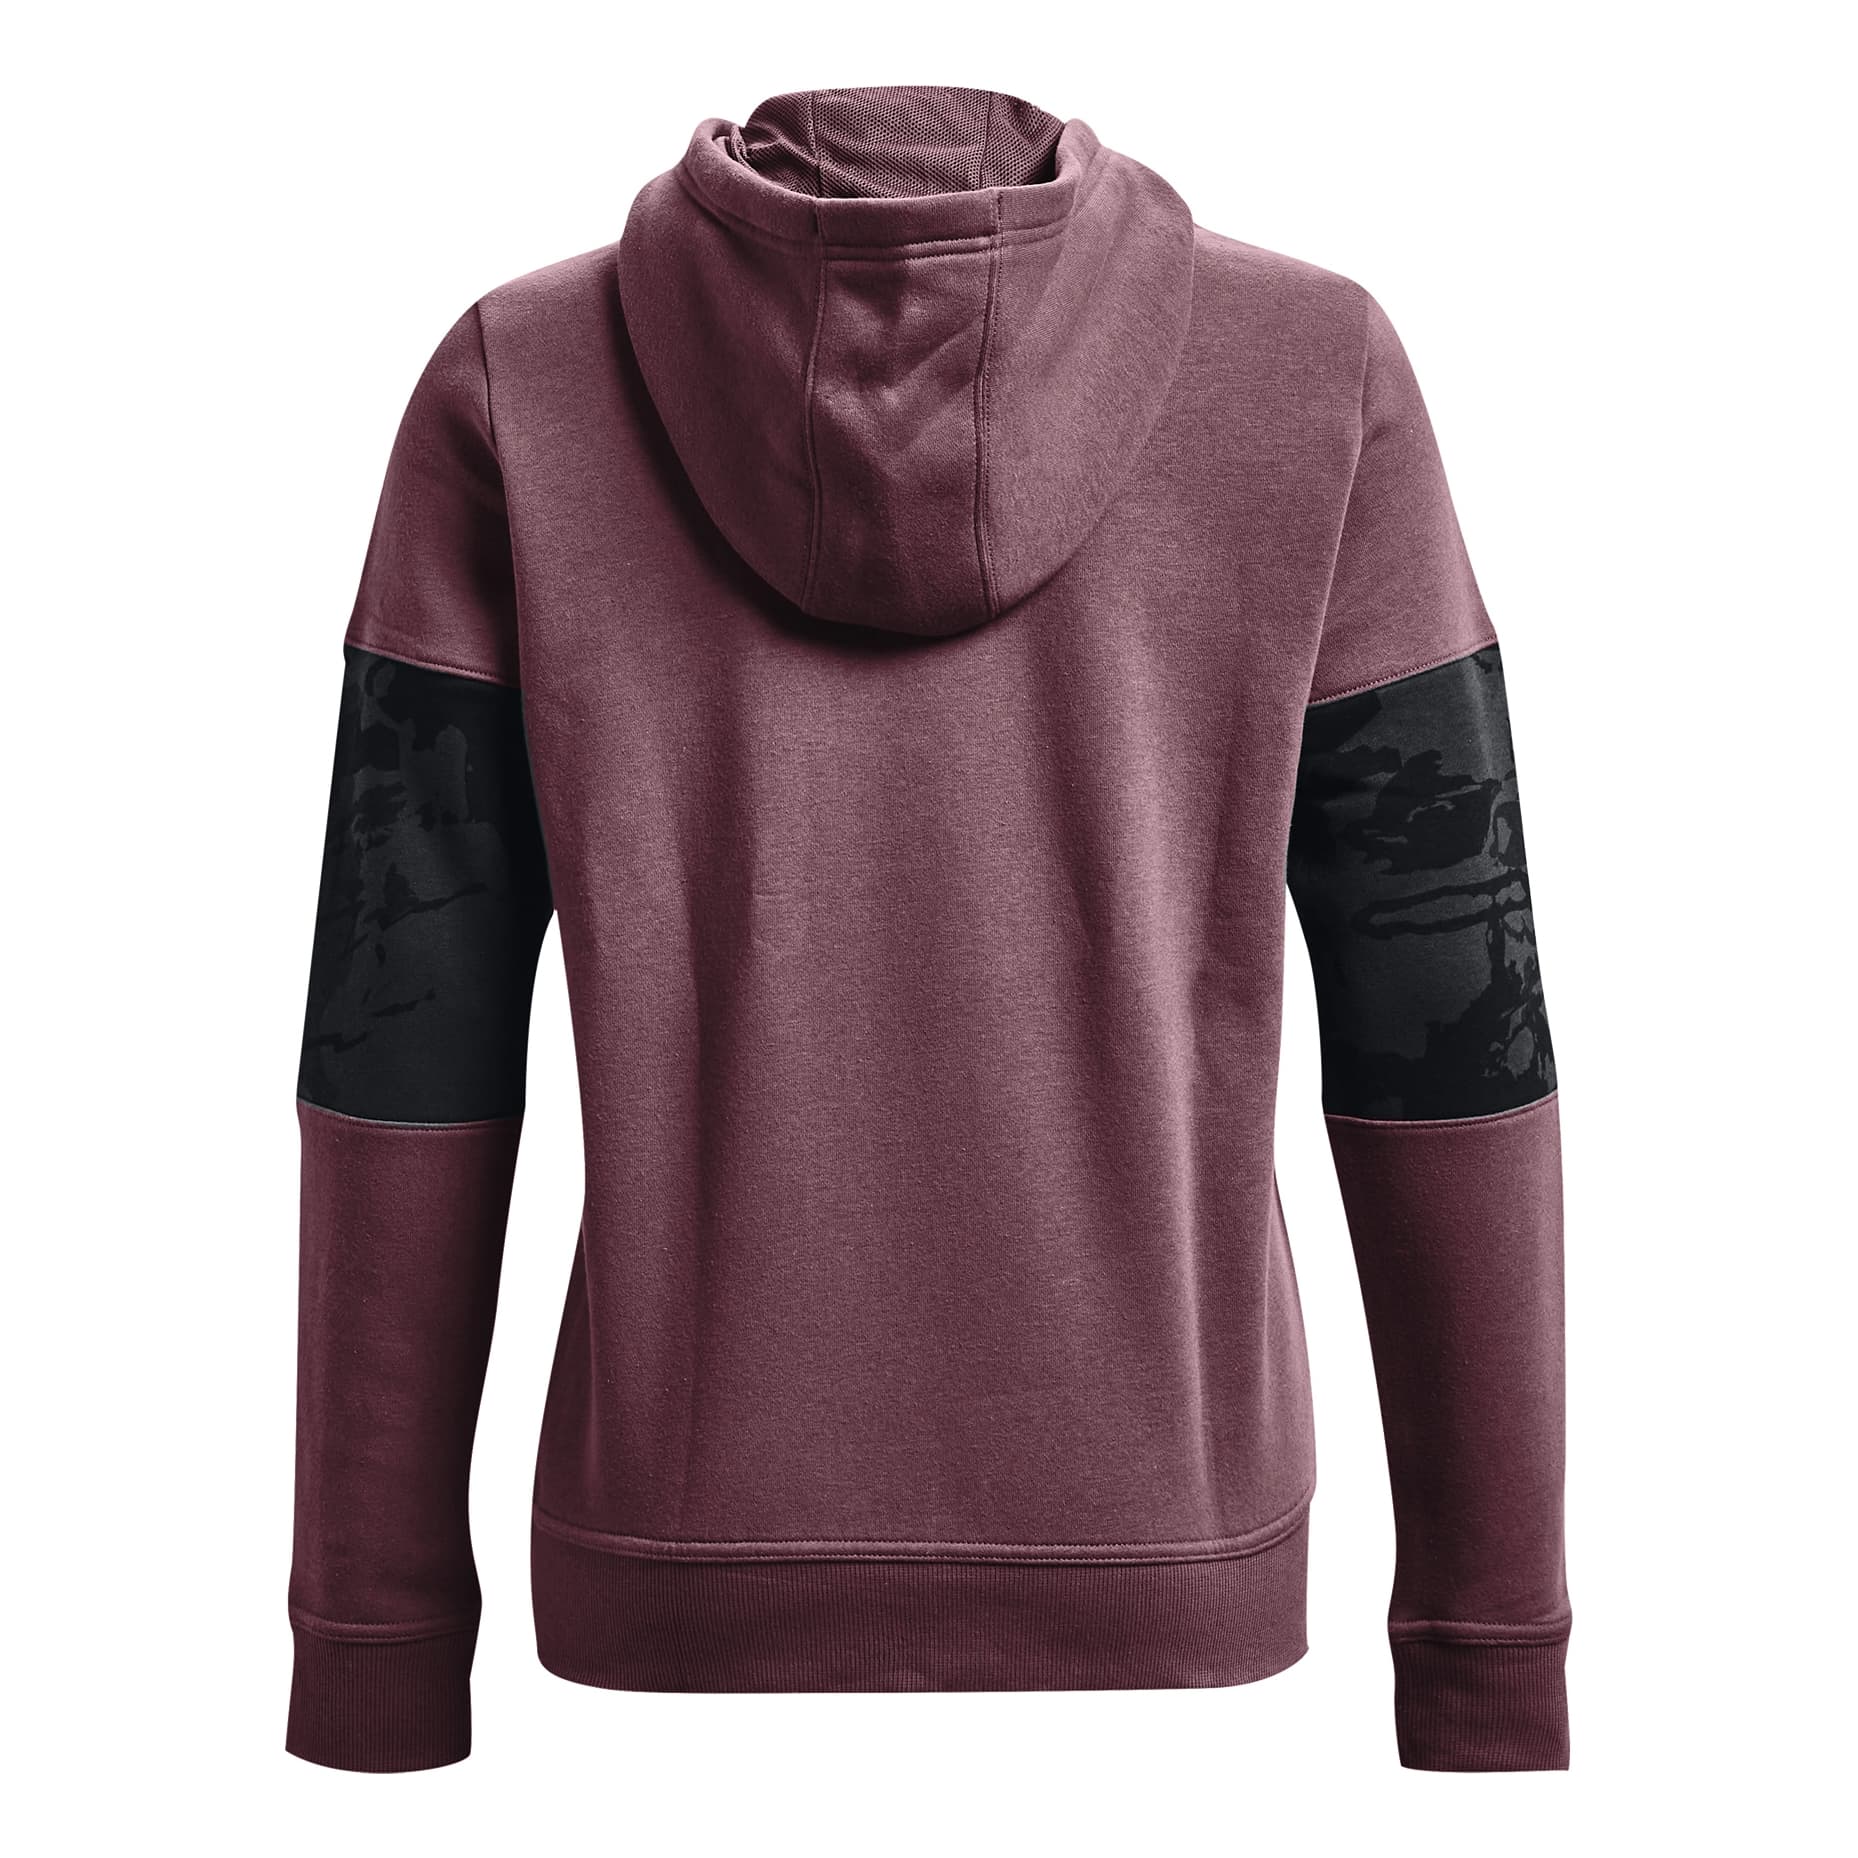 Under Armour® Women’s Rival Long-Sleeve Hoodie - Ash Plum - back